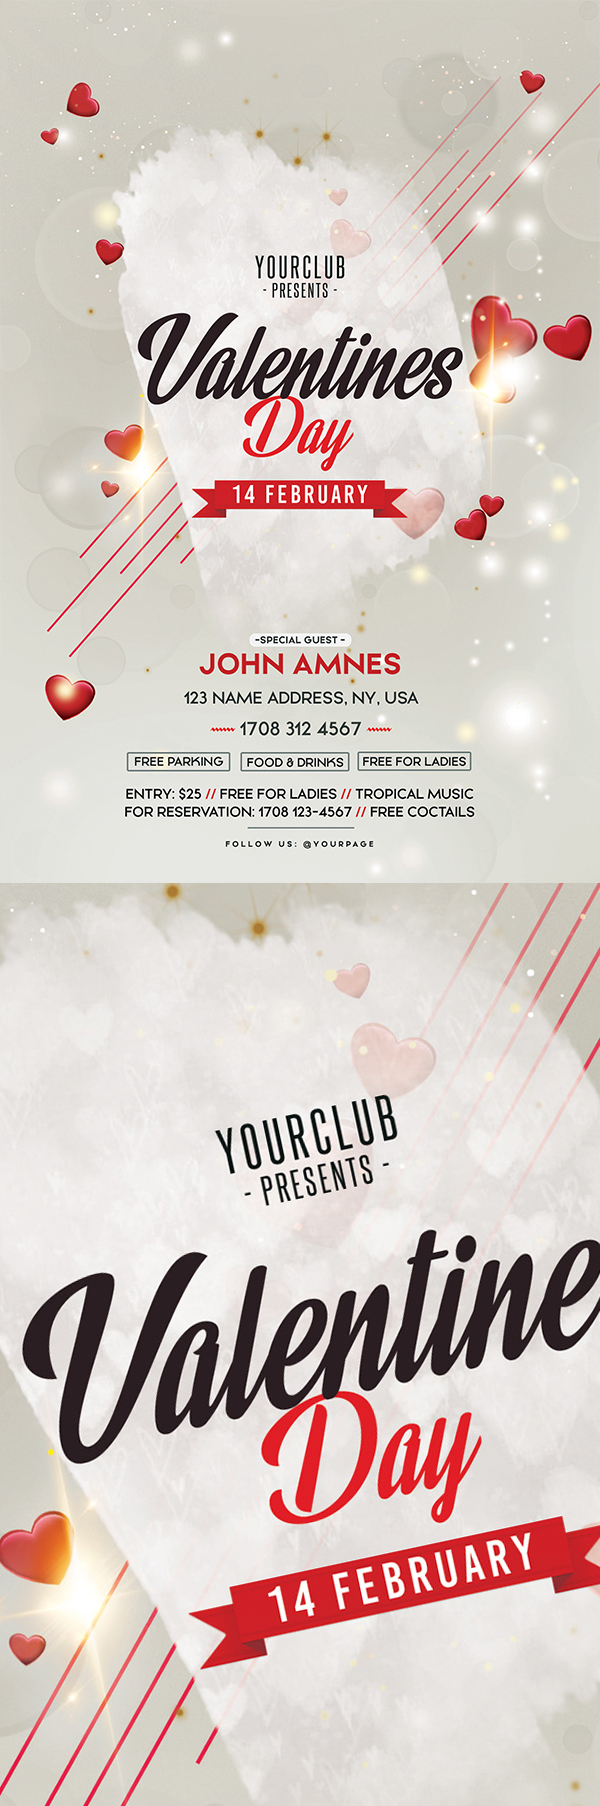 Freebies for 2019: Free Valentine’s Day PSD Flyer Template